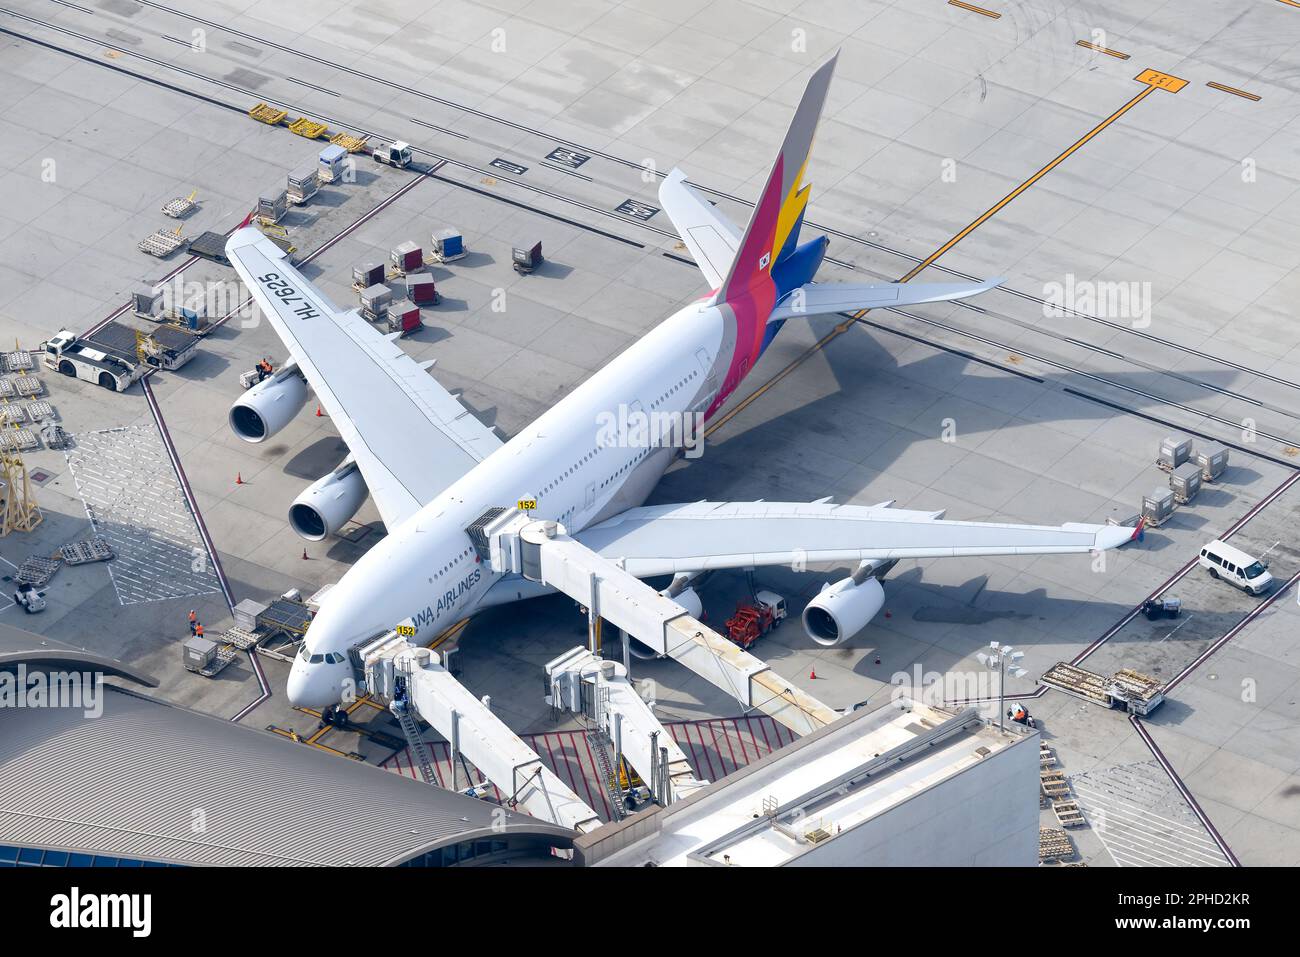 Asiana Airlines Airbus A380 airplane parked seen from above. Aircraft A380-800 of Asiana Airlines registered as HL7625 aerial view. Stock Photo